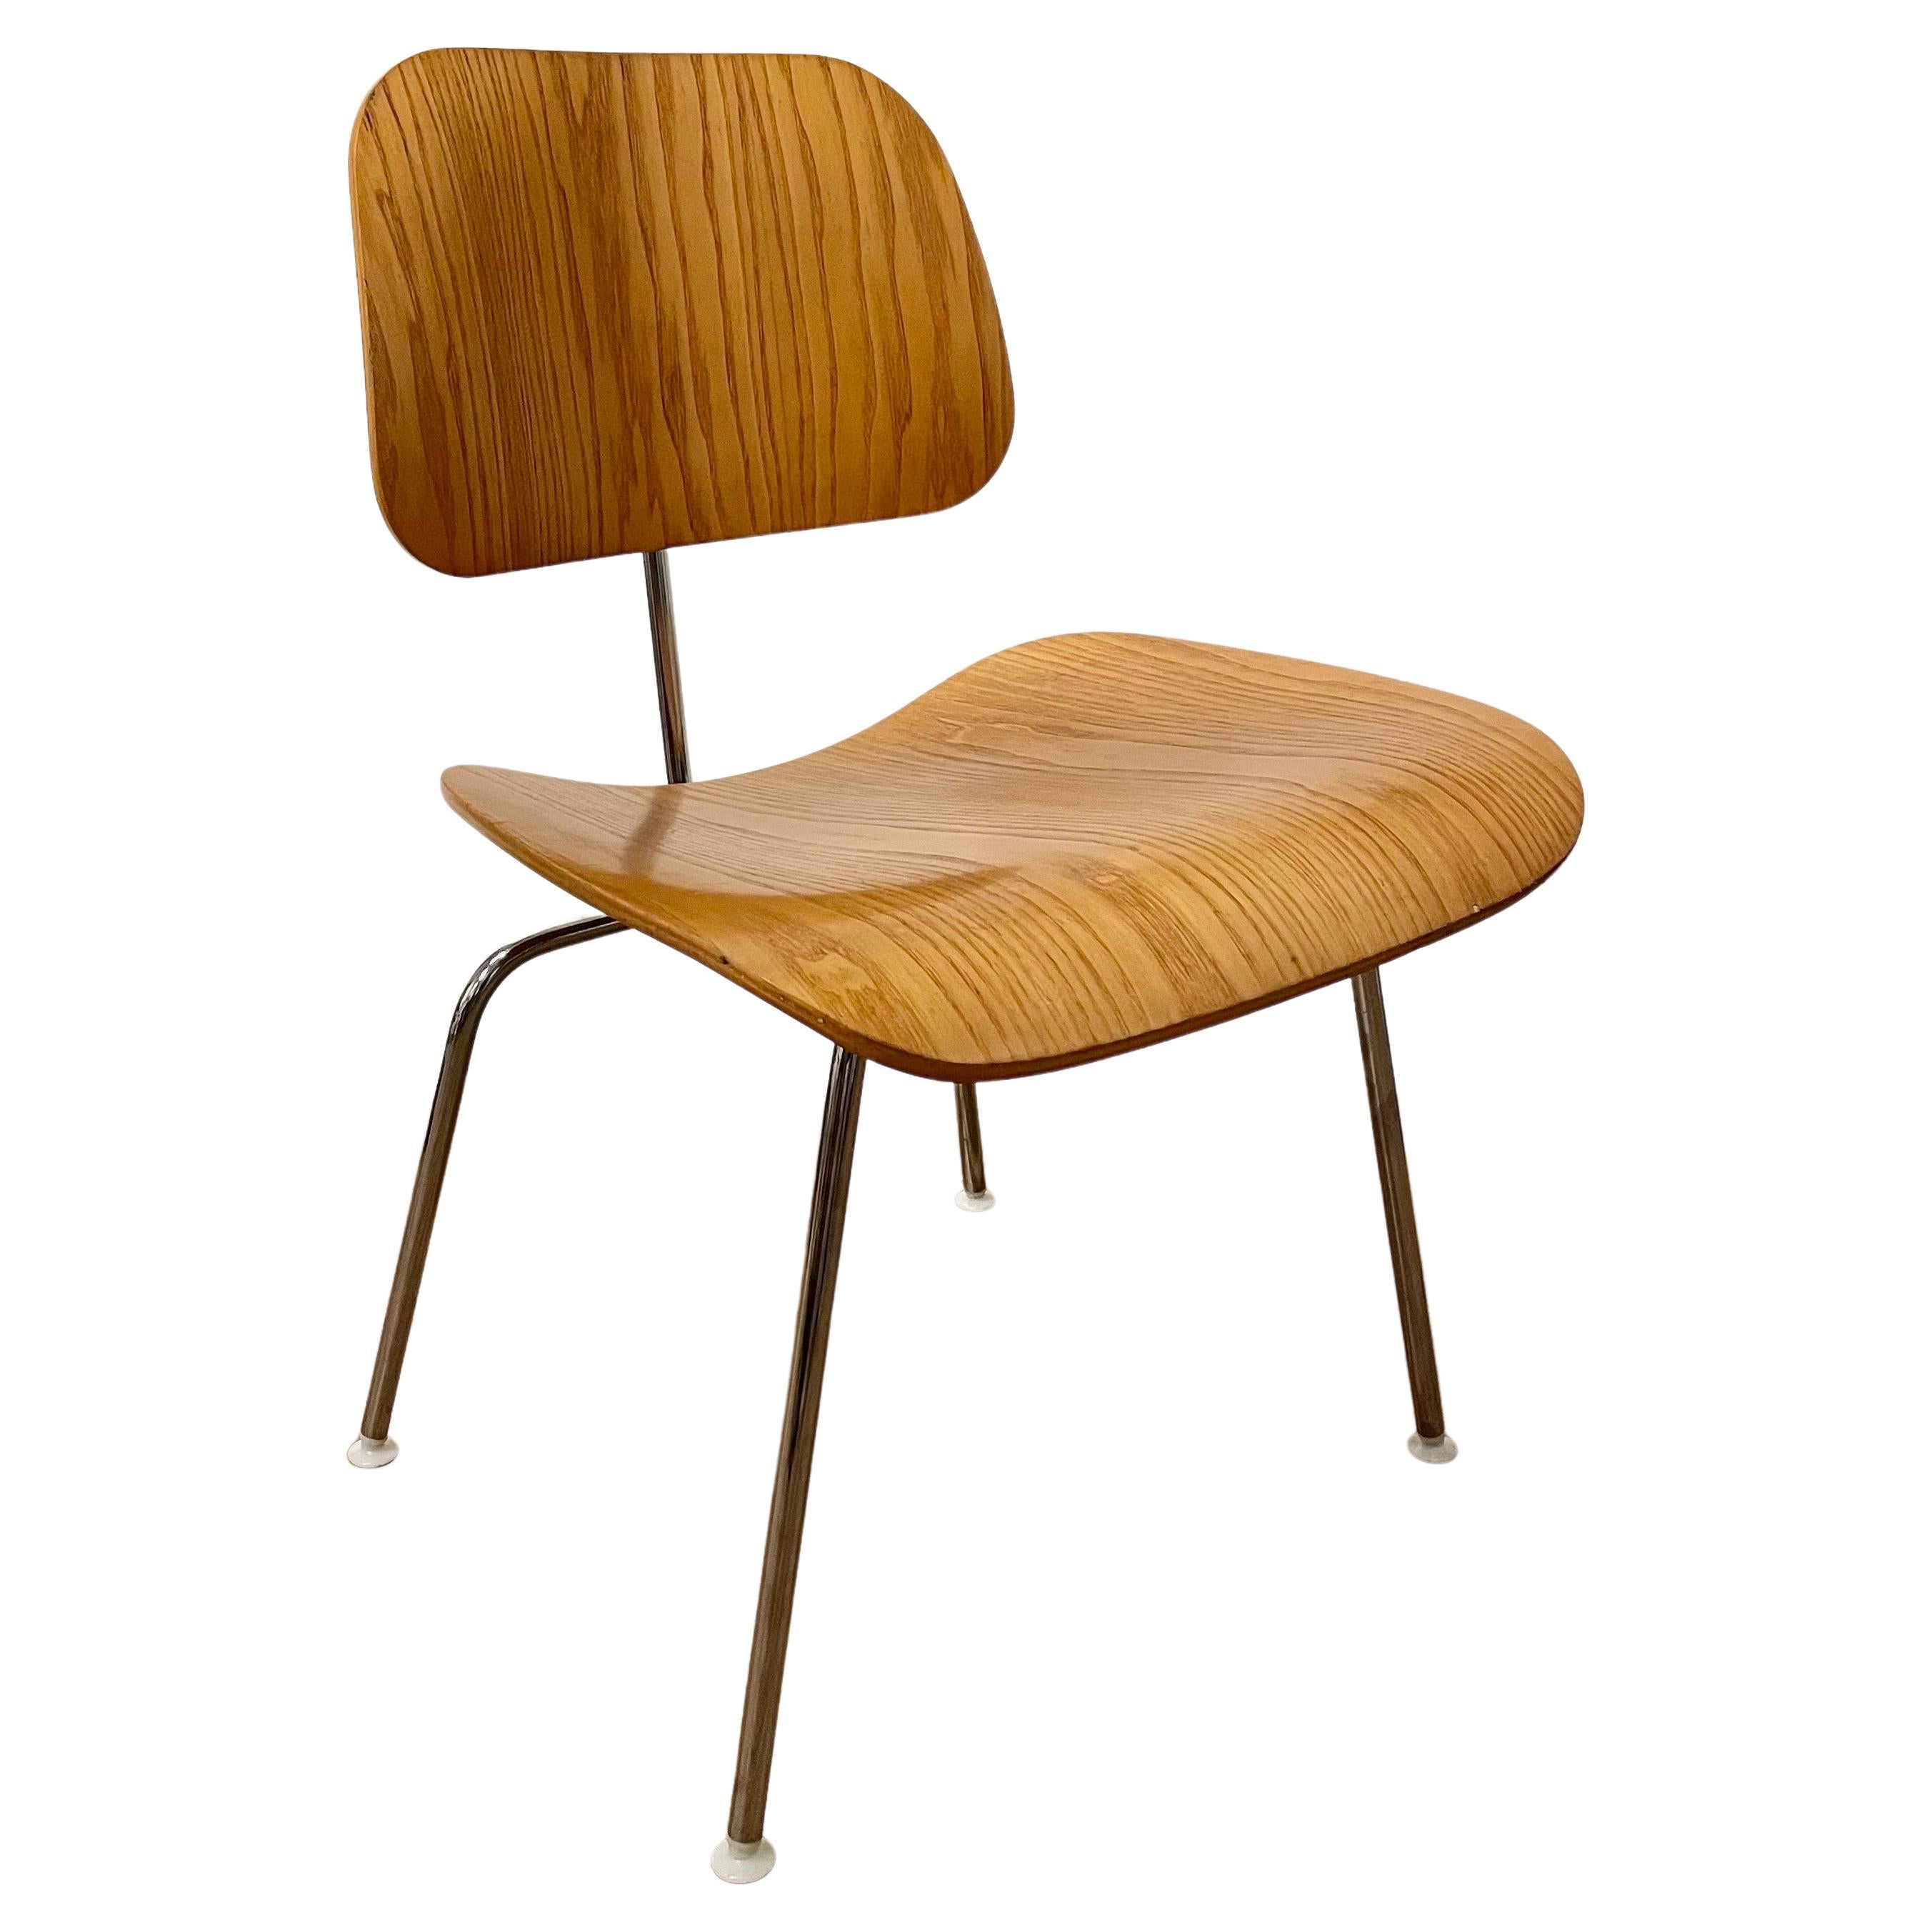 DCM Chair Designed by Charles Eames for Herman Miller